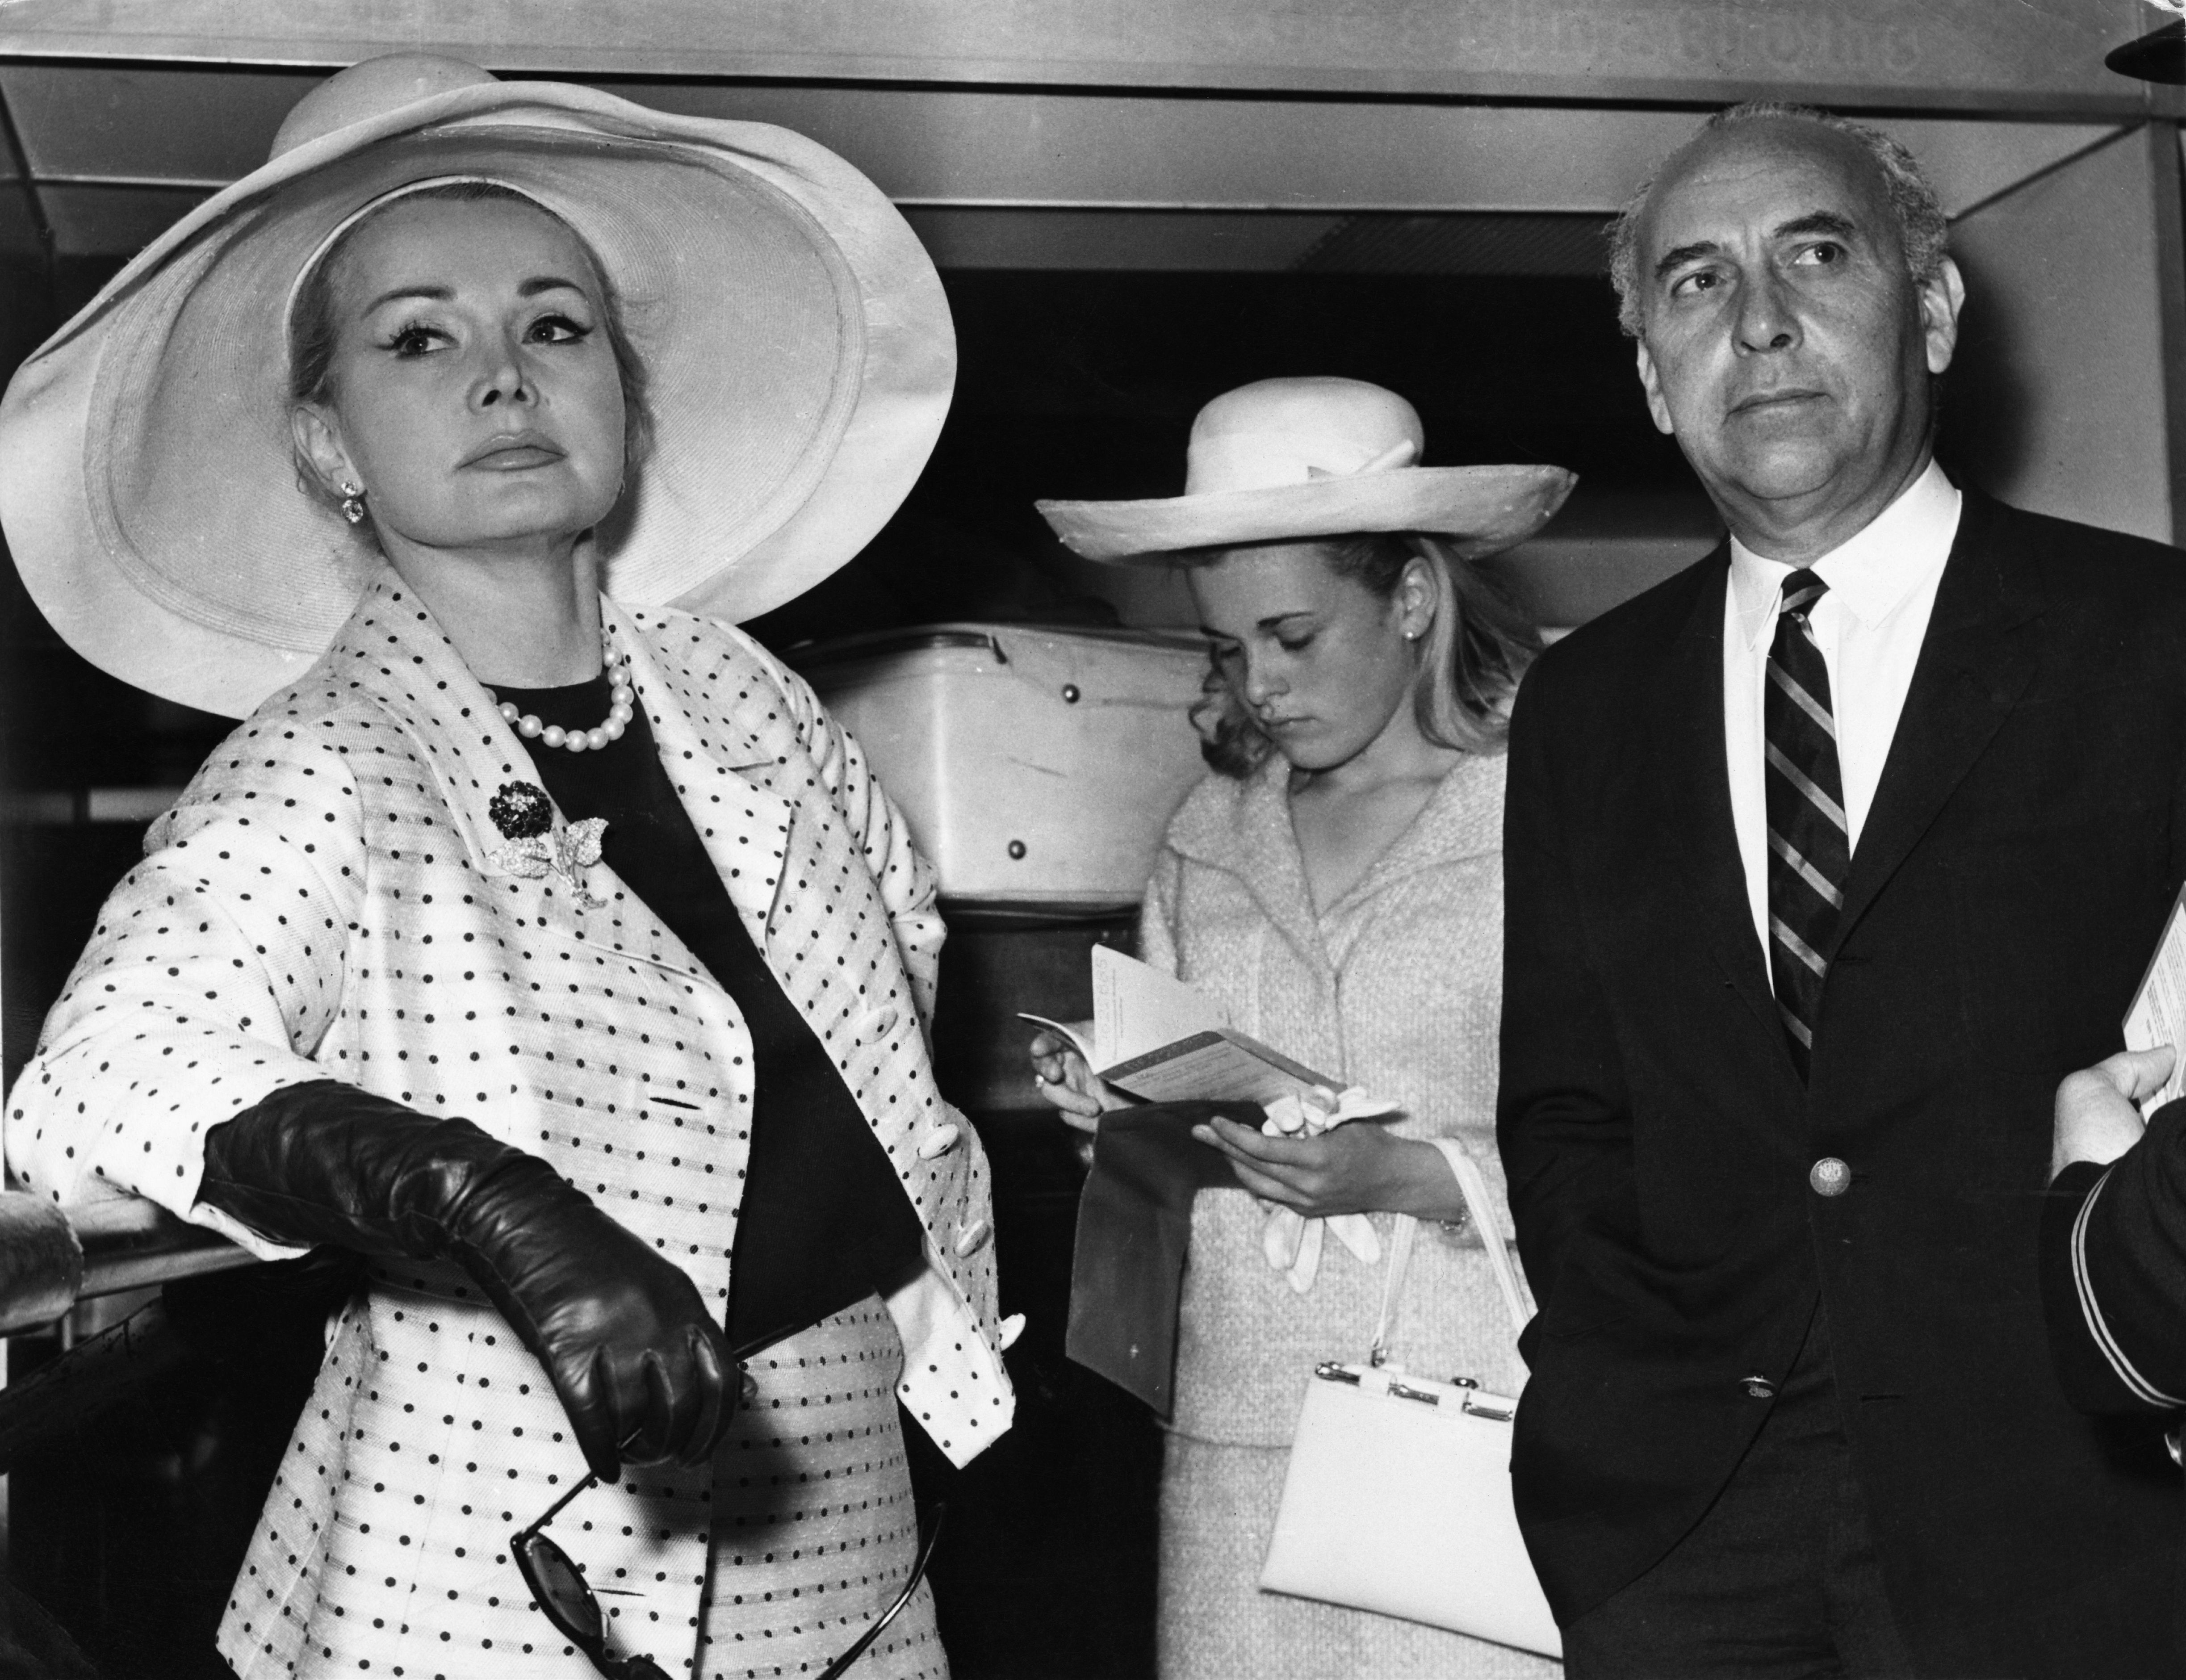 Hungarian-American actress Zsa Zsa Gabor with her husband Herbert Hutner and daughter Francesca Hilton, circa 1965. (Photo by Express/Hulton Archive/Getty Images)